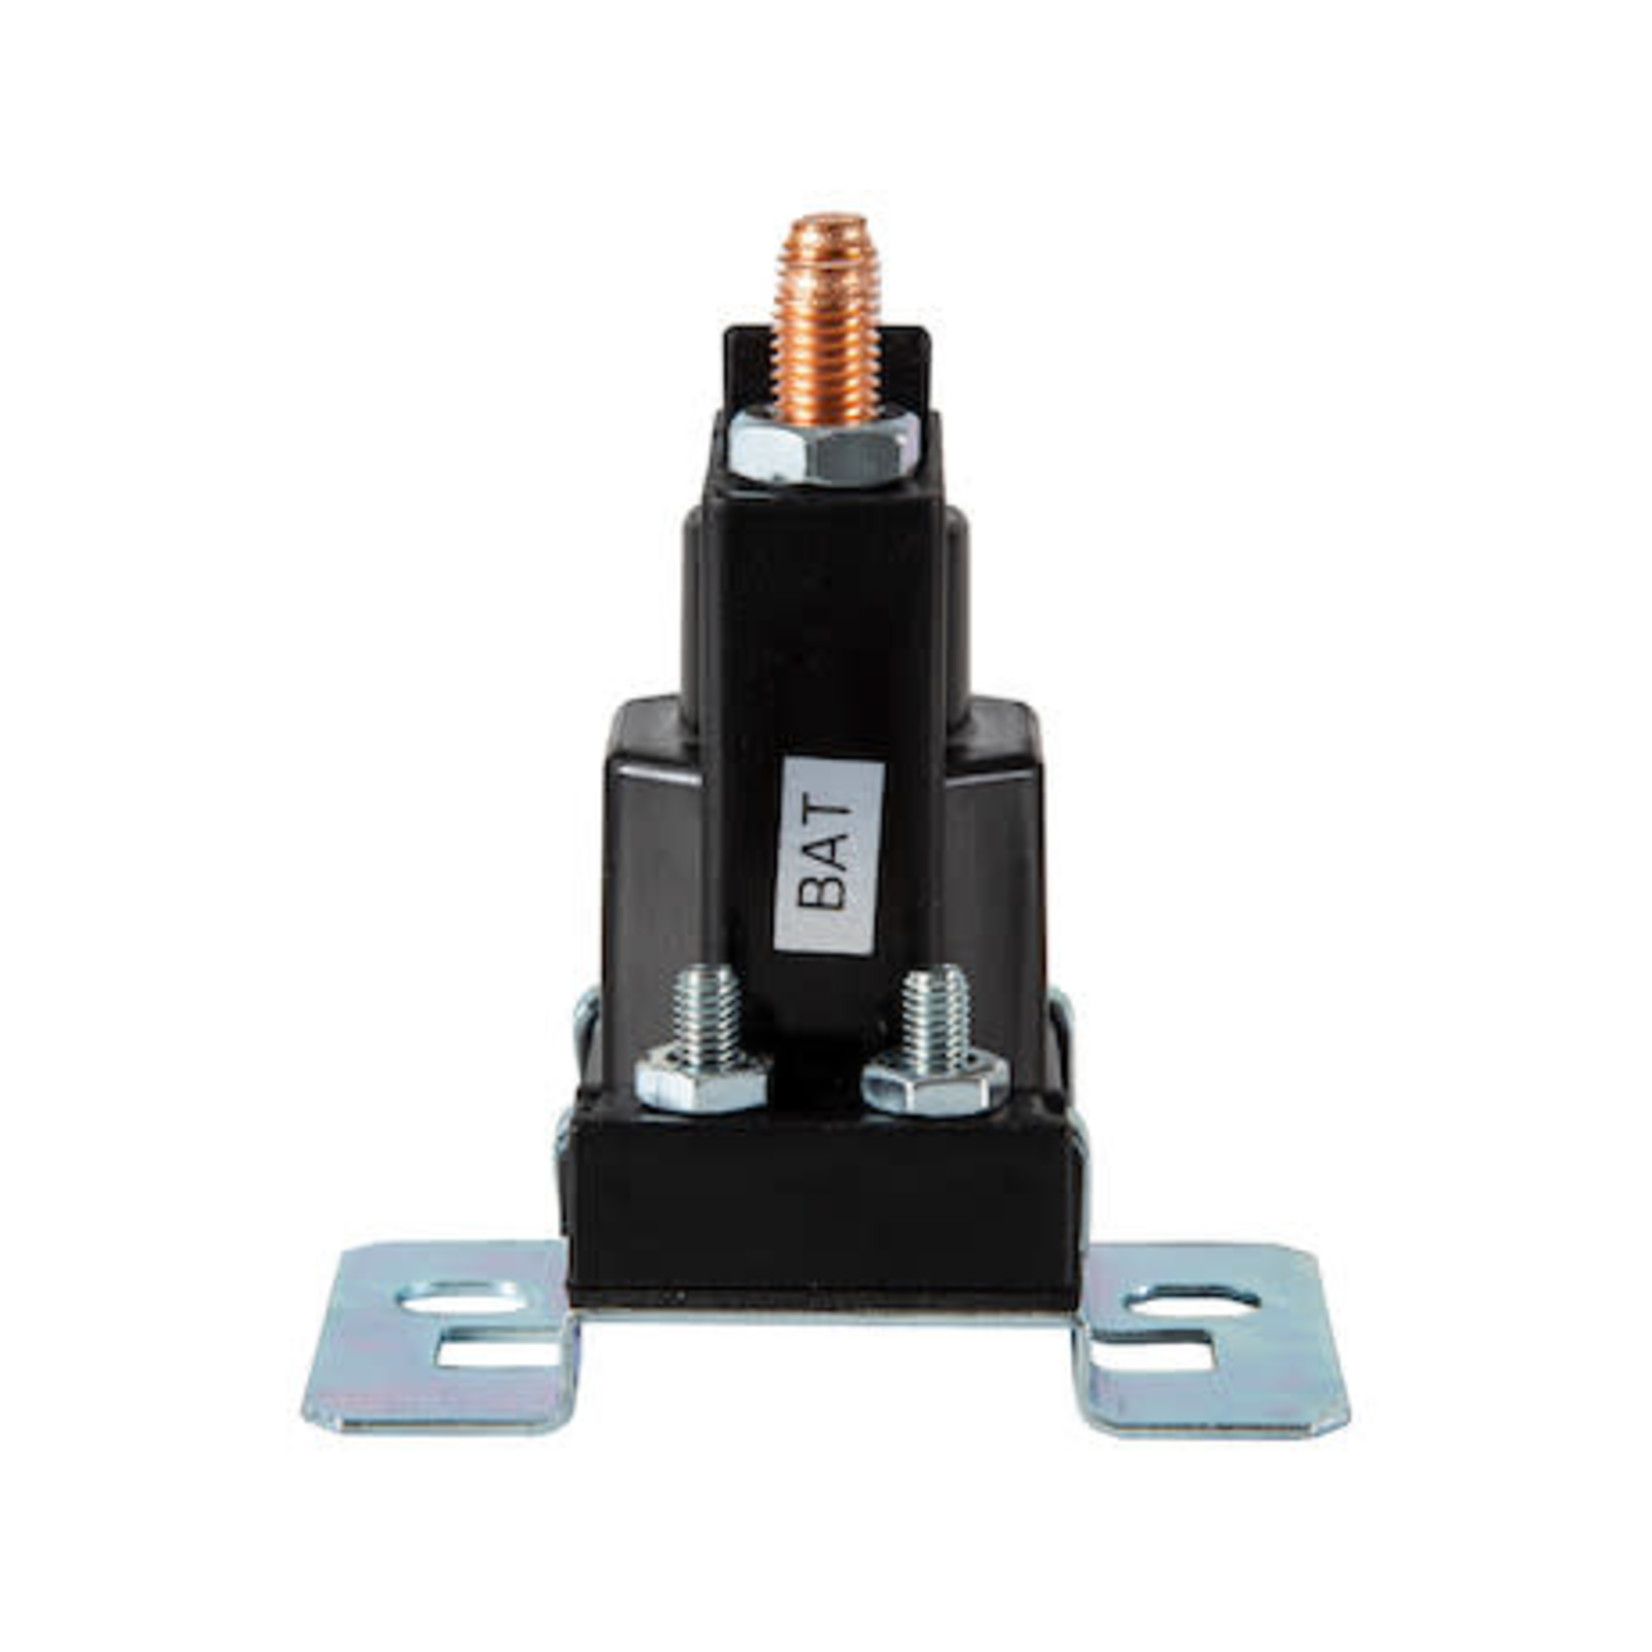 SAM SAM Relay Solenoid For Hydraulic System-Replaces Sno-Way #96002086